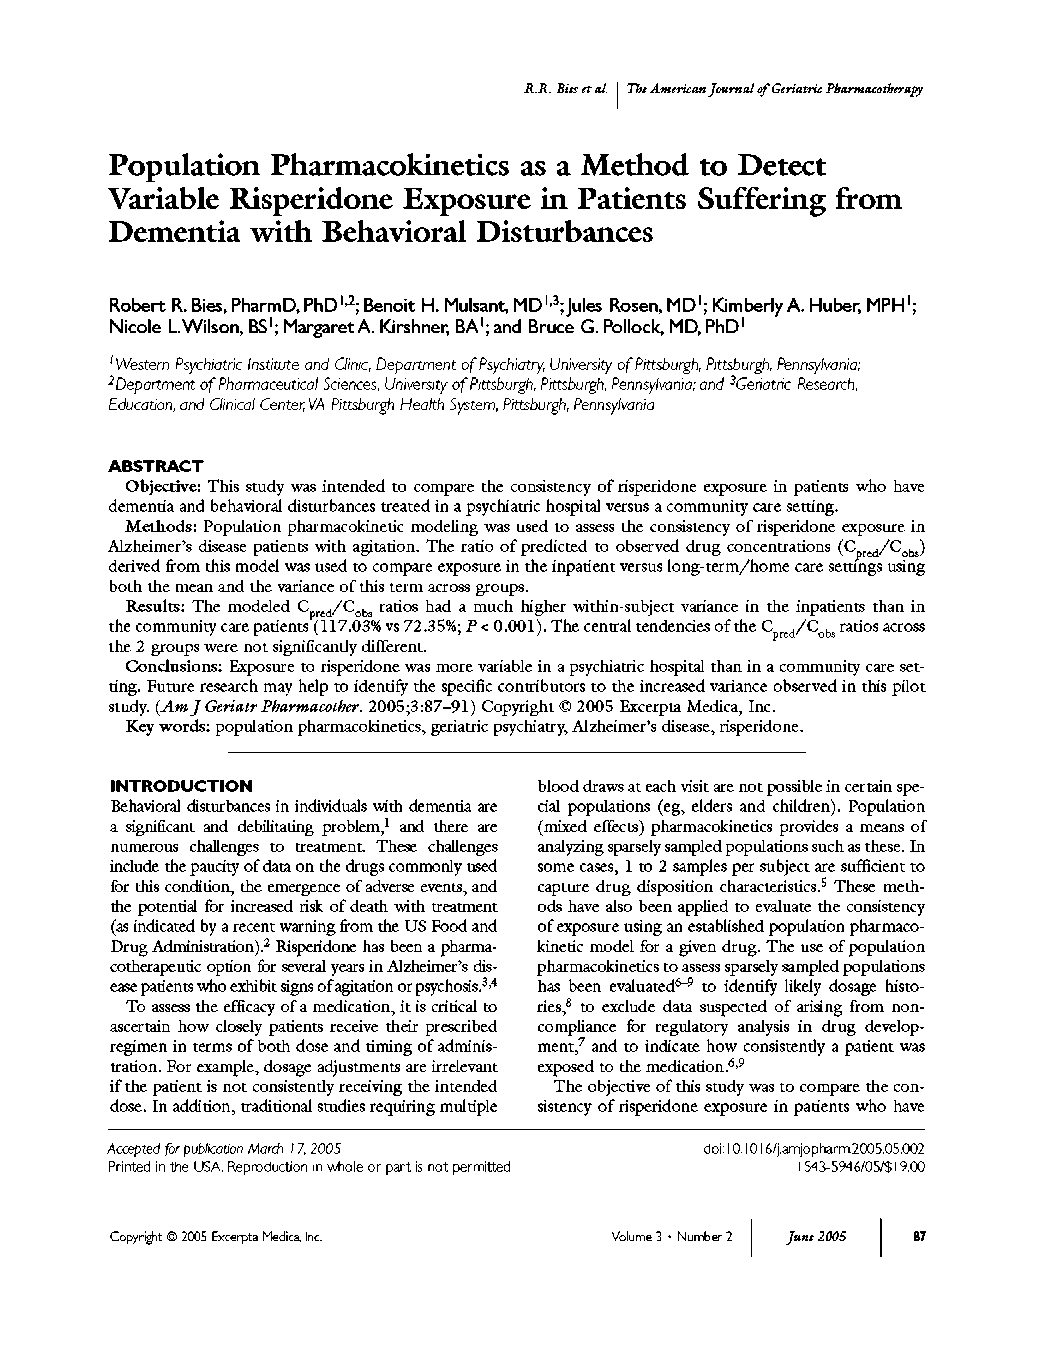 Population pharmacokinetics as a method to detect variable risperidone exposure in patients suffering from dementia with behavioral disturbances